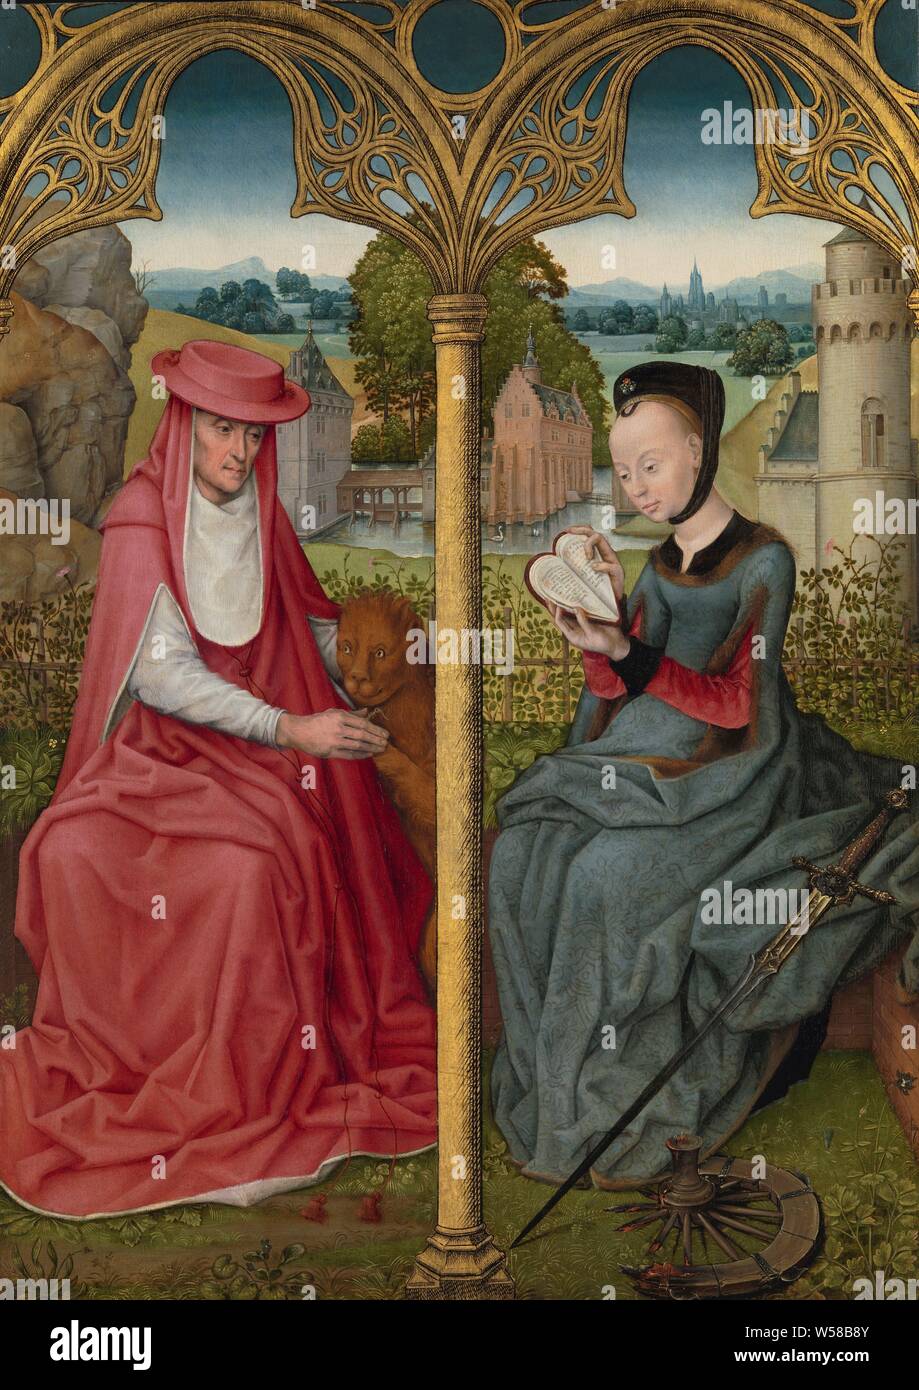 St Jerome and St Catherine of Alexandria, Saint Jerome and Sainte Catherine, De hl. Hieronymus and the hl. Catherine sits on a turf bench that is shielded from the landscape behind by a rose hedge. Jerome is accompanied by his symbol animal, the lion, from whose leg he has drawn a thorn. There is a smoldering, broken wooden wheel at Catharina's feet, and a long sword leaning beside her, both symbols of her martyrdom. The royal daughter Catharina was considered a role model for rich, courtly women, and as such she is also depicted here. She has a highly shaved forehead in the fashion of that Stock Photo